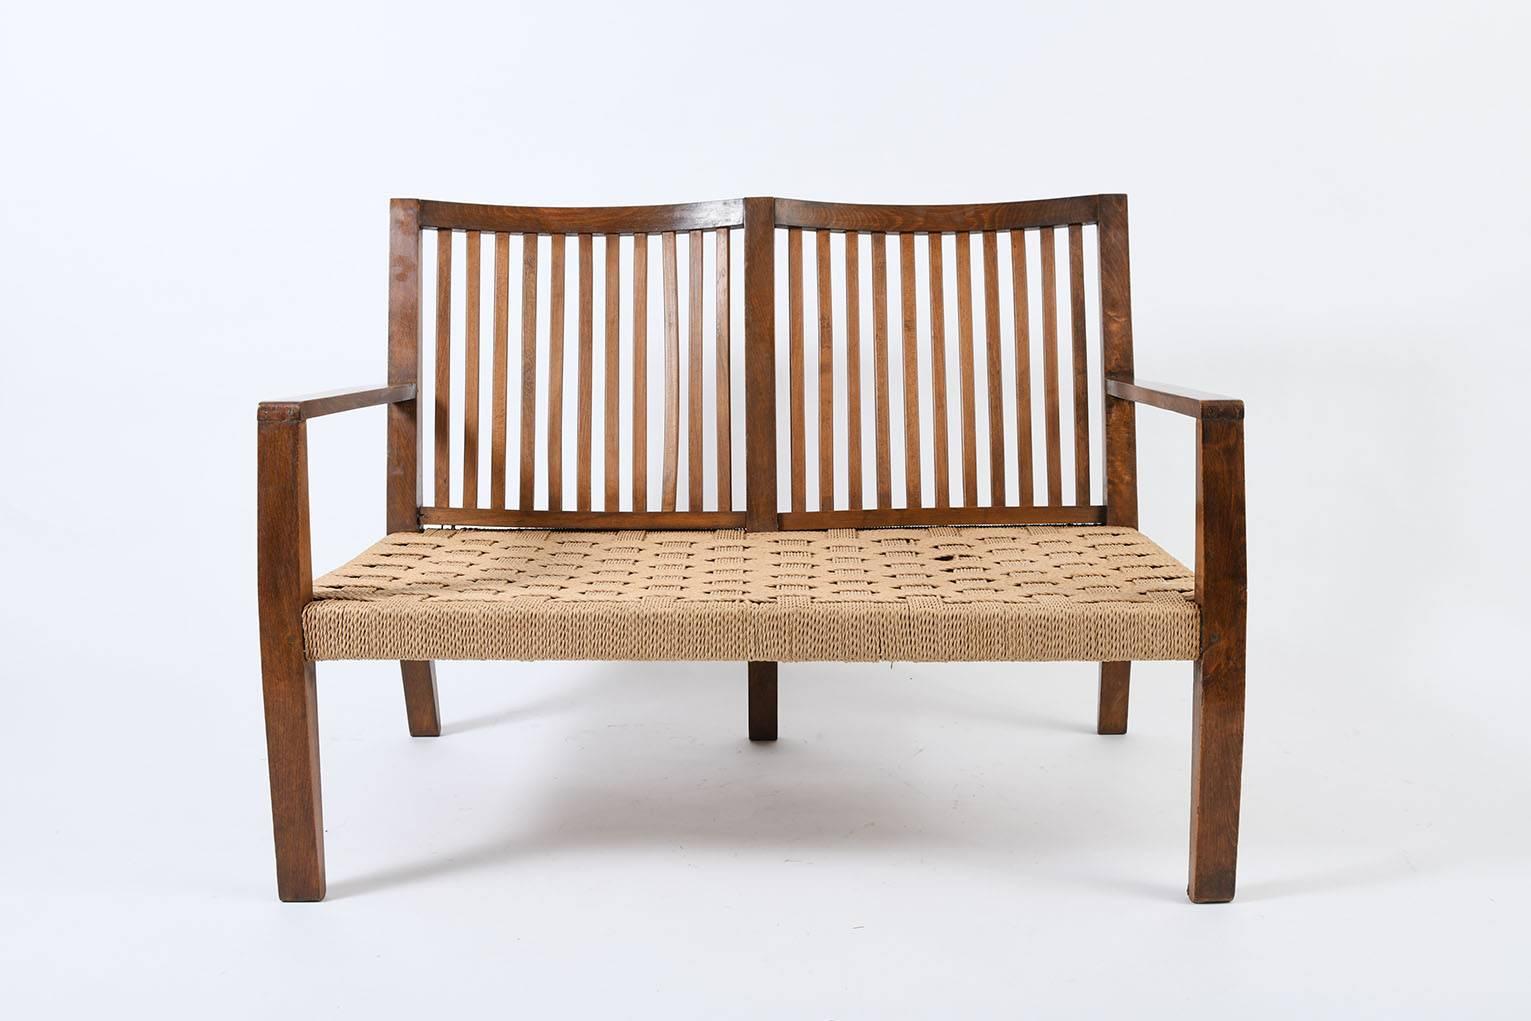 An oak and woven rope settee with a double curved back
Italy, circa 1940.